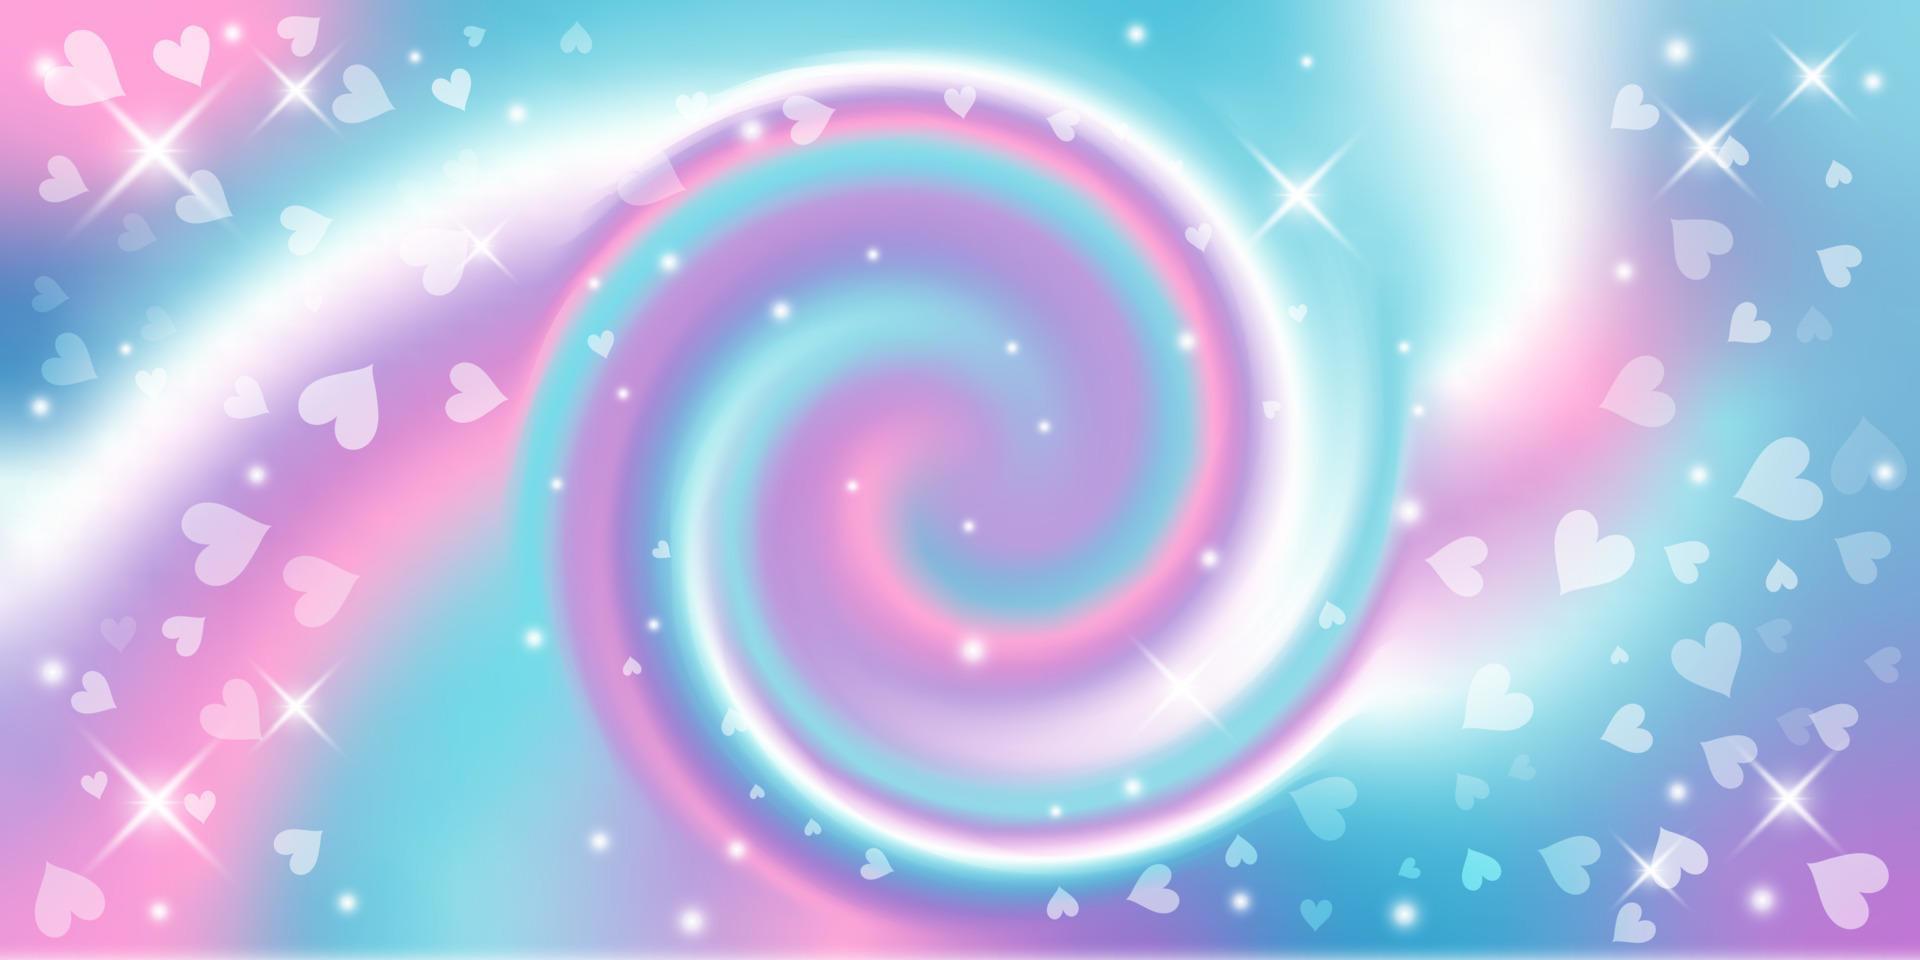 Rainbow swirl background with stars and hearts. Radial gradient rainbow of twisted spiral. Vector illustration.